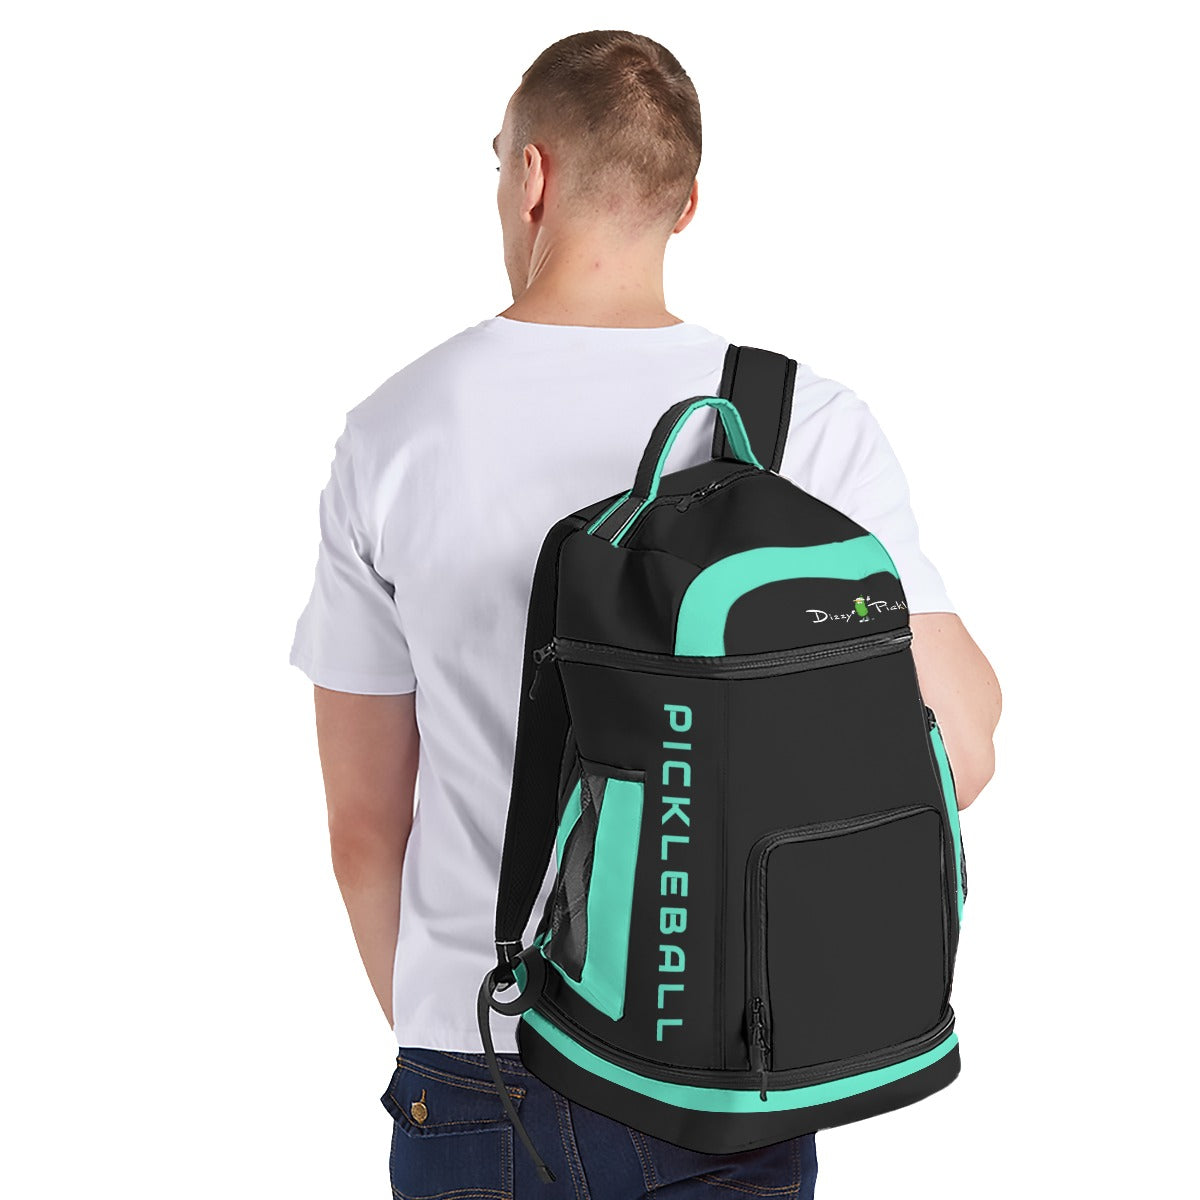 Dizzy Pickle DZY P Classic DW4 Unisex Large Courtside Pickleball Multi-Compartment Backpack with Adjustable Straps